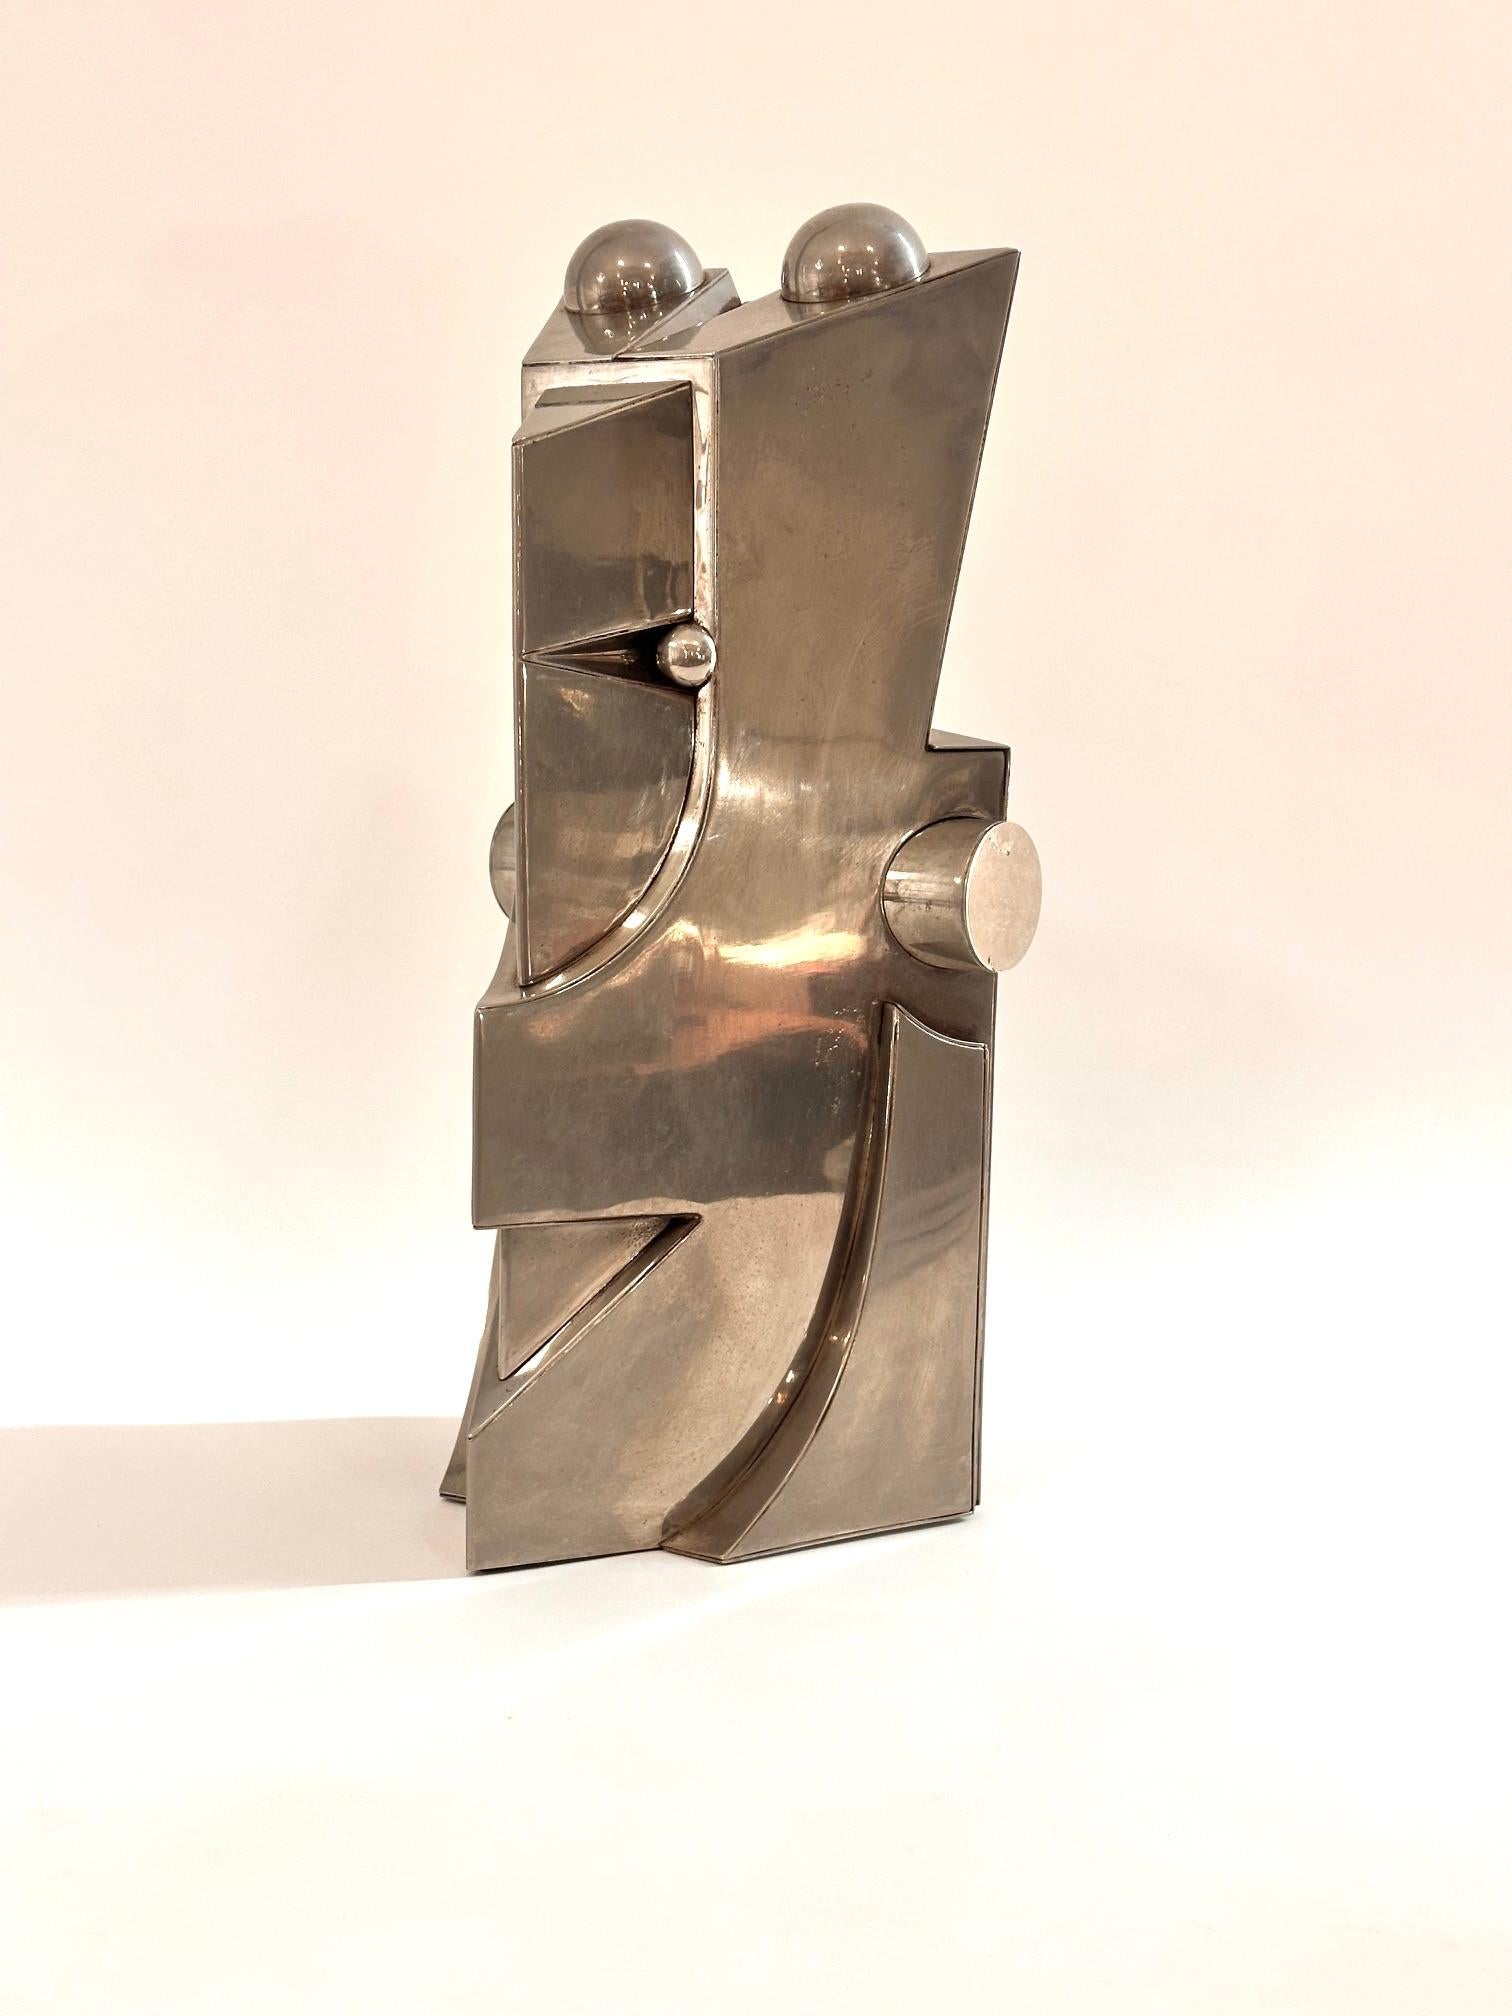 Abstract Polished Steel Sculpture 